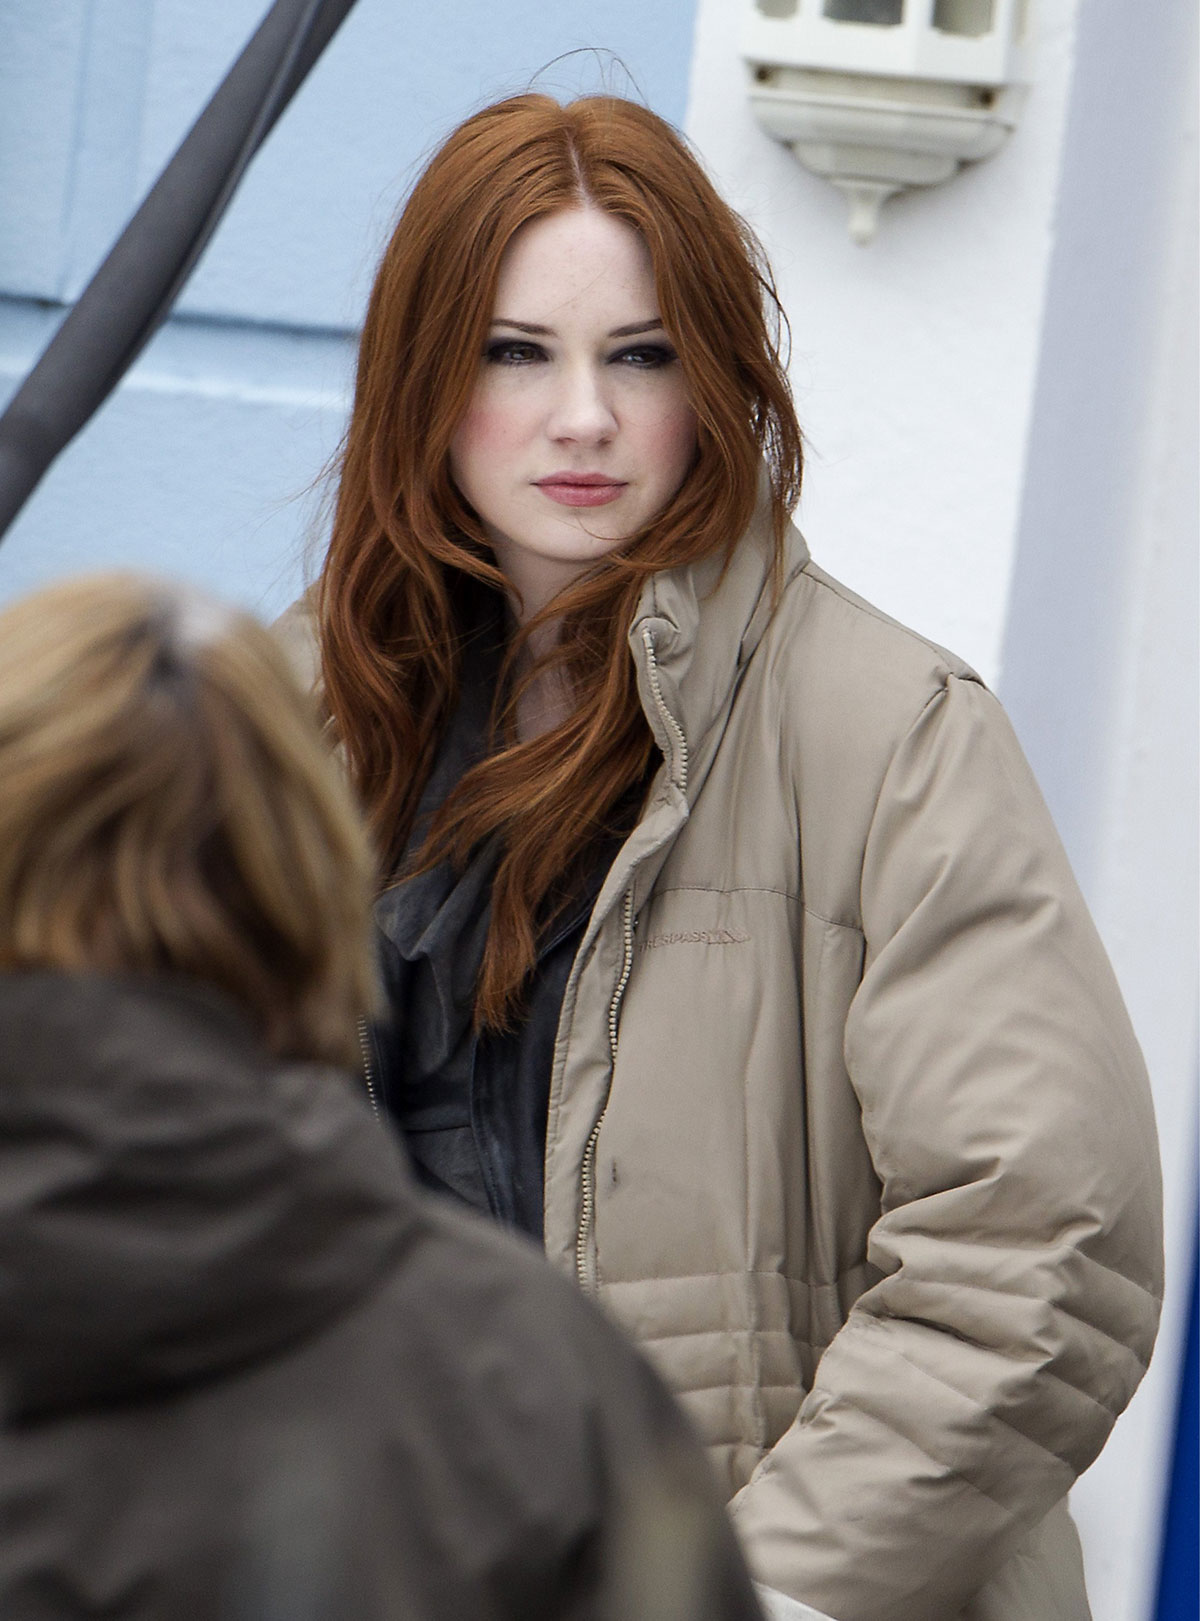 KAREN GILLAN at the Set of Doctor Who in Cardiff - HawtCelebs